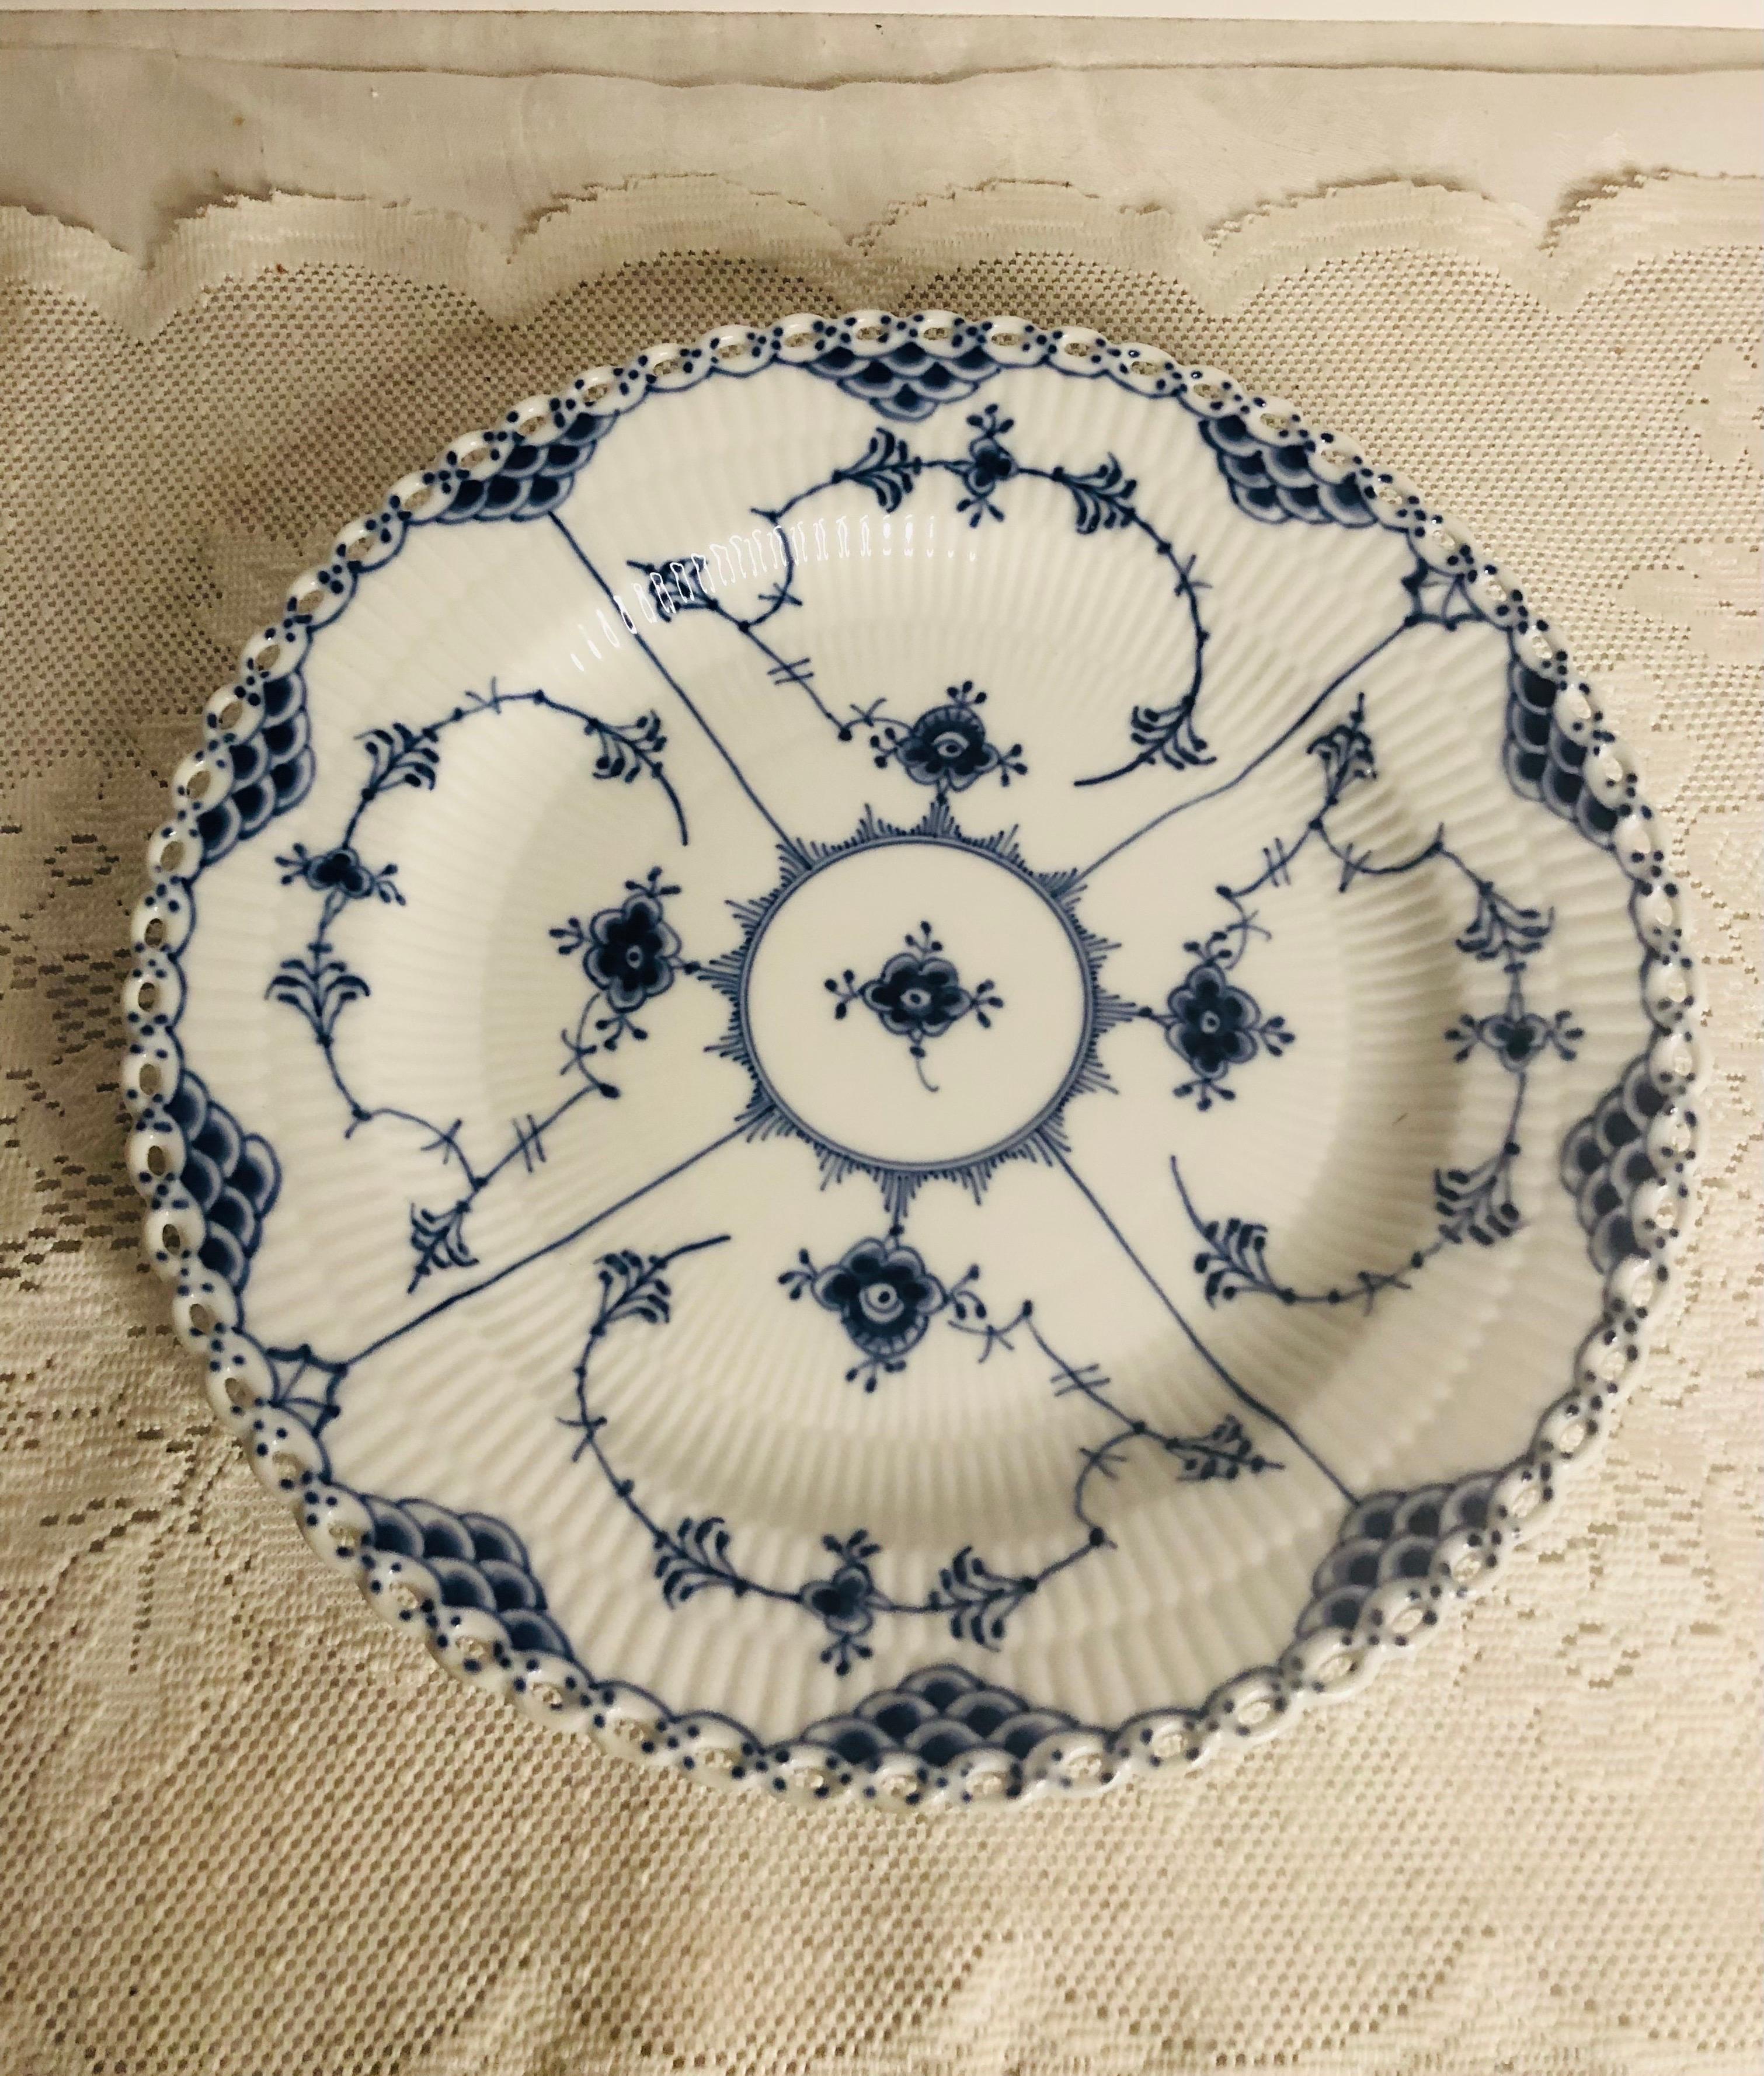 Set of 11 Royal Copenhagen Fluted Dinner Plates with Full Lace Openwork Design 2